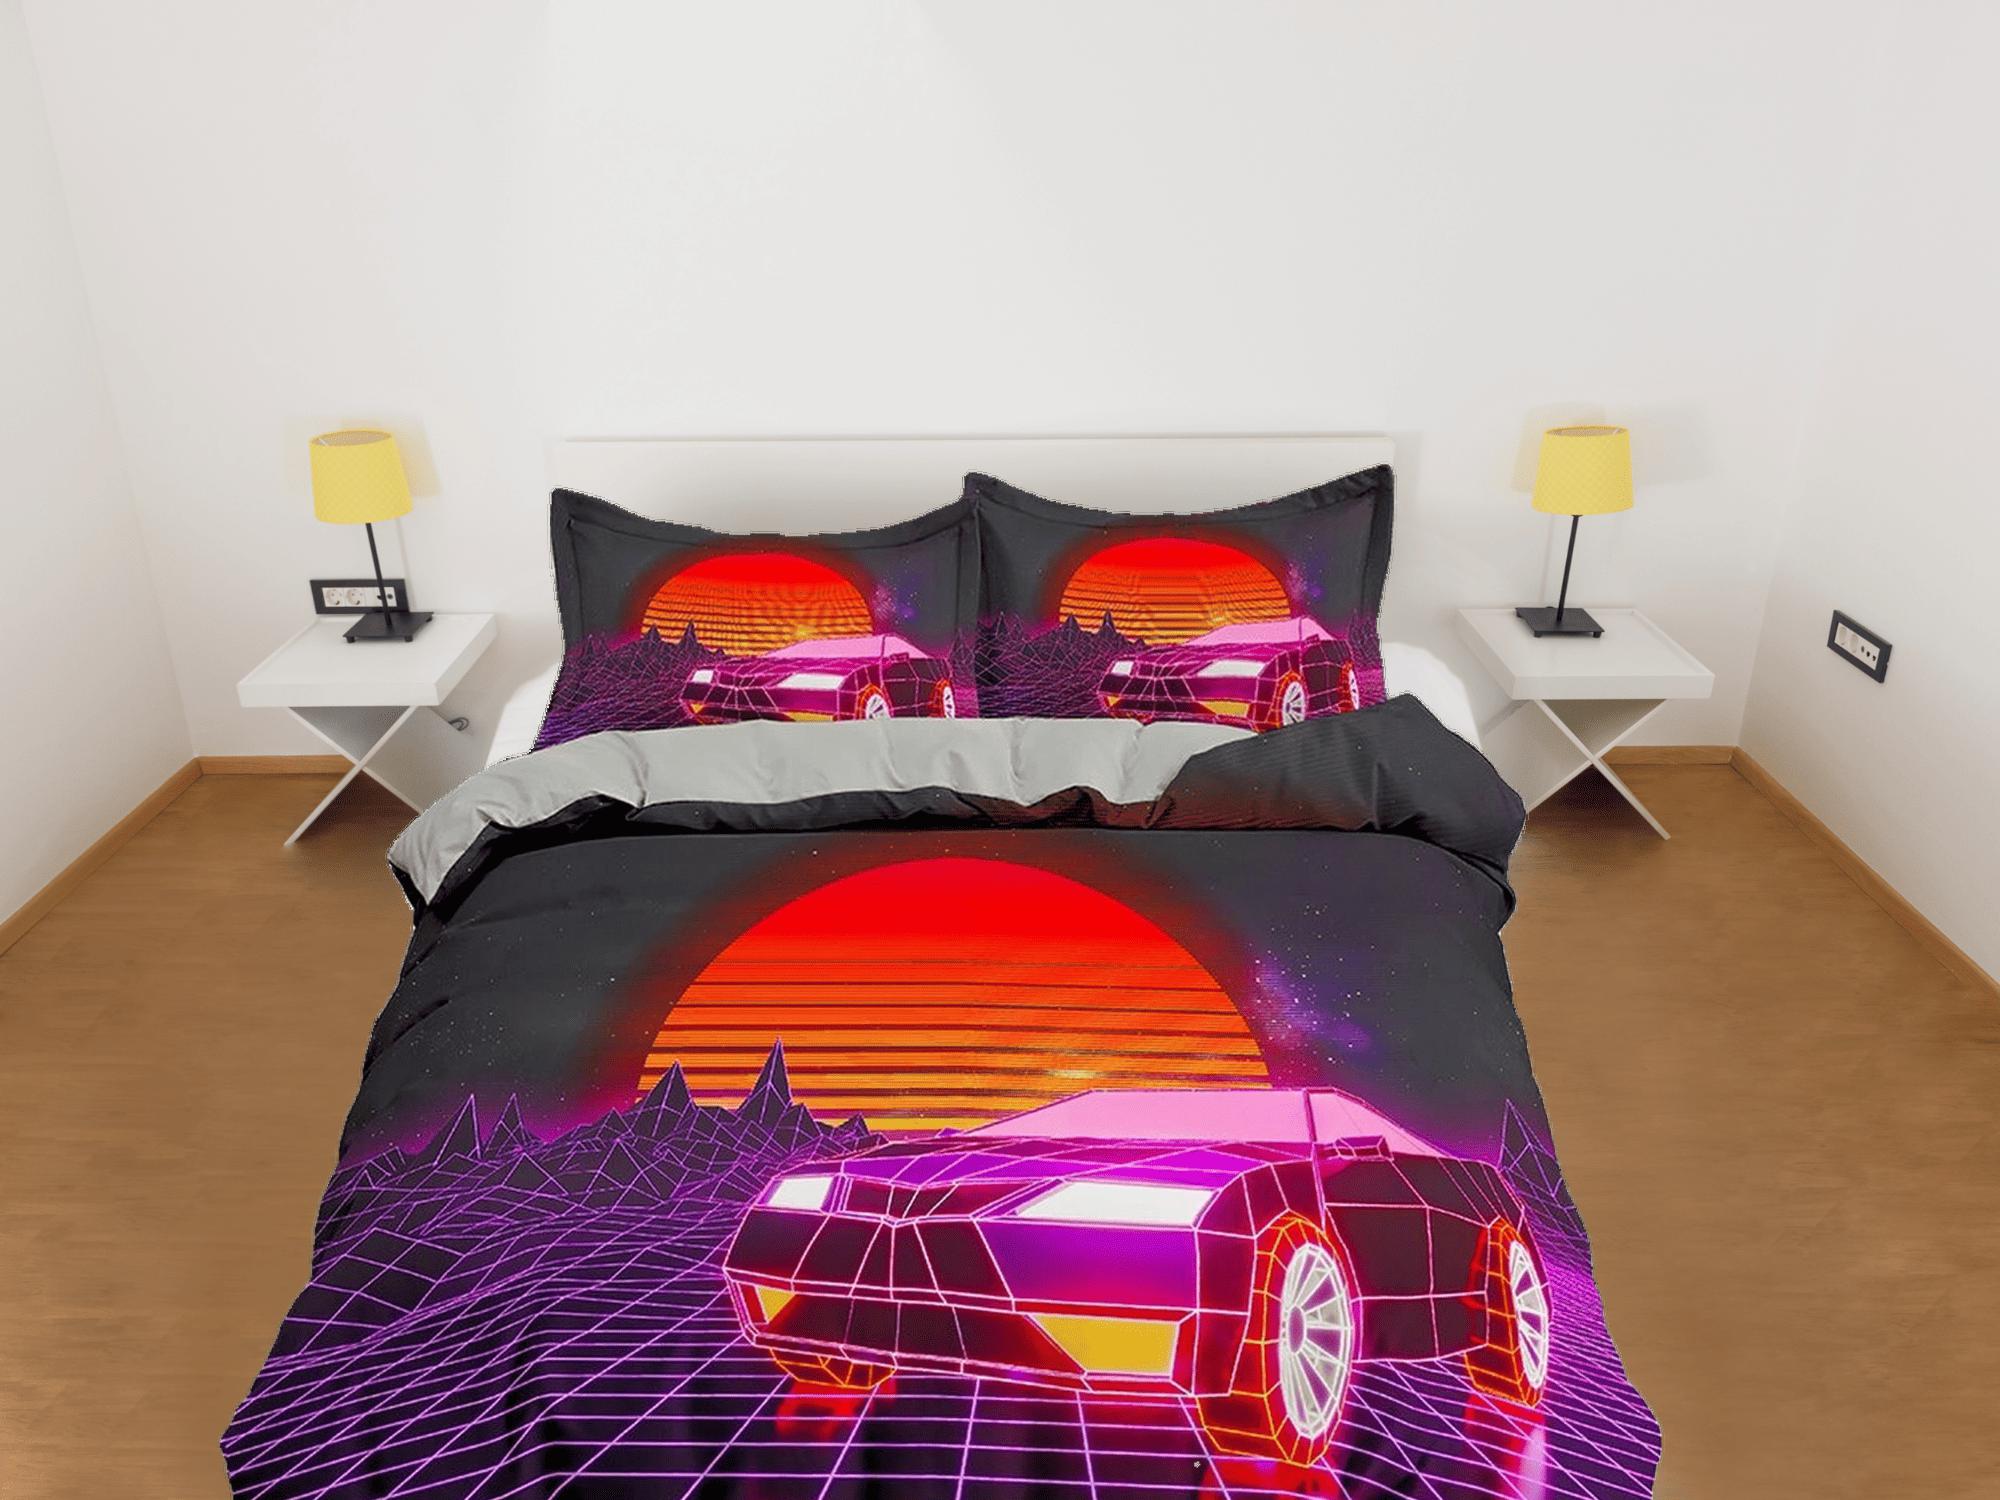 daintyduvet Vaporwave Retro Car in Sunset Bedding, Cool Hippie Duvet Cover Set for Boys Bedroom, Trippy Psychedelic Bed Cover, King Queen Full Twin Bed